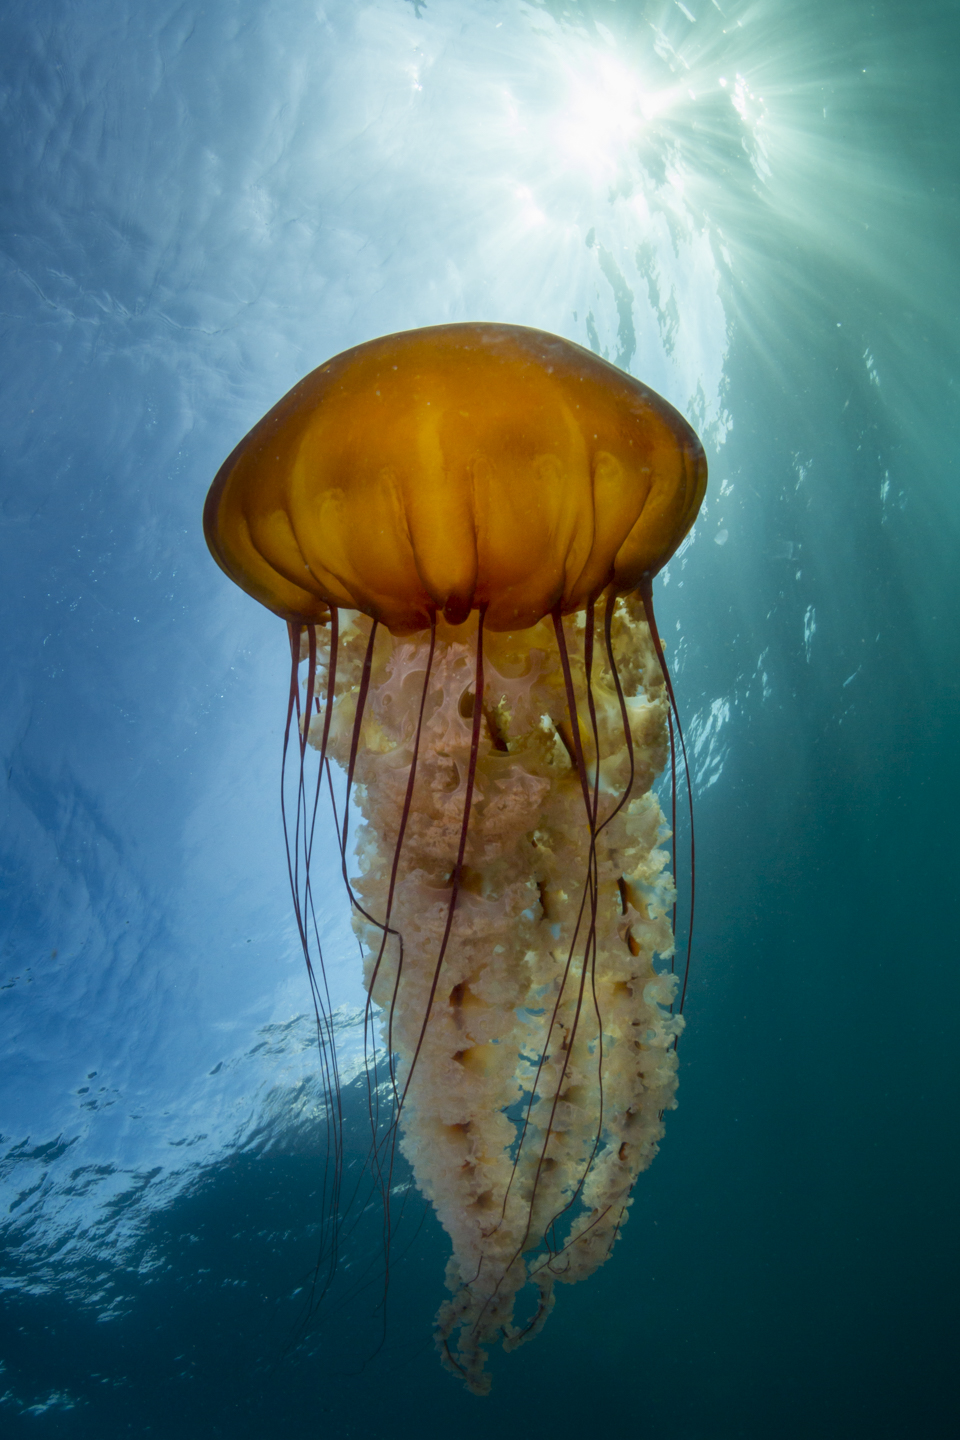 A sea nettle jellyfish drifts by during our safety stop, taken off of Monterey, CA